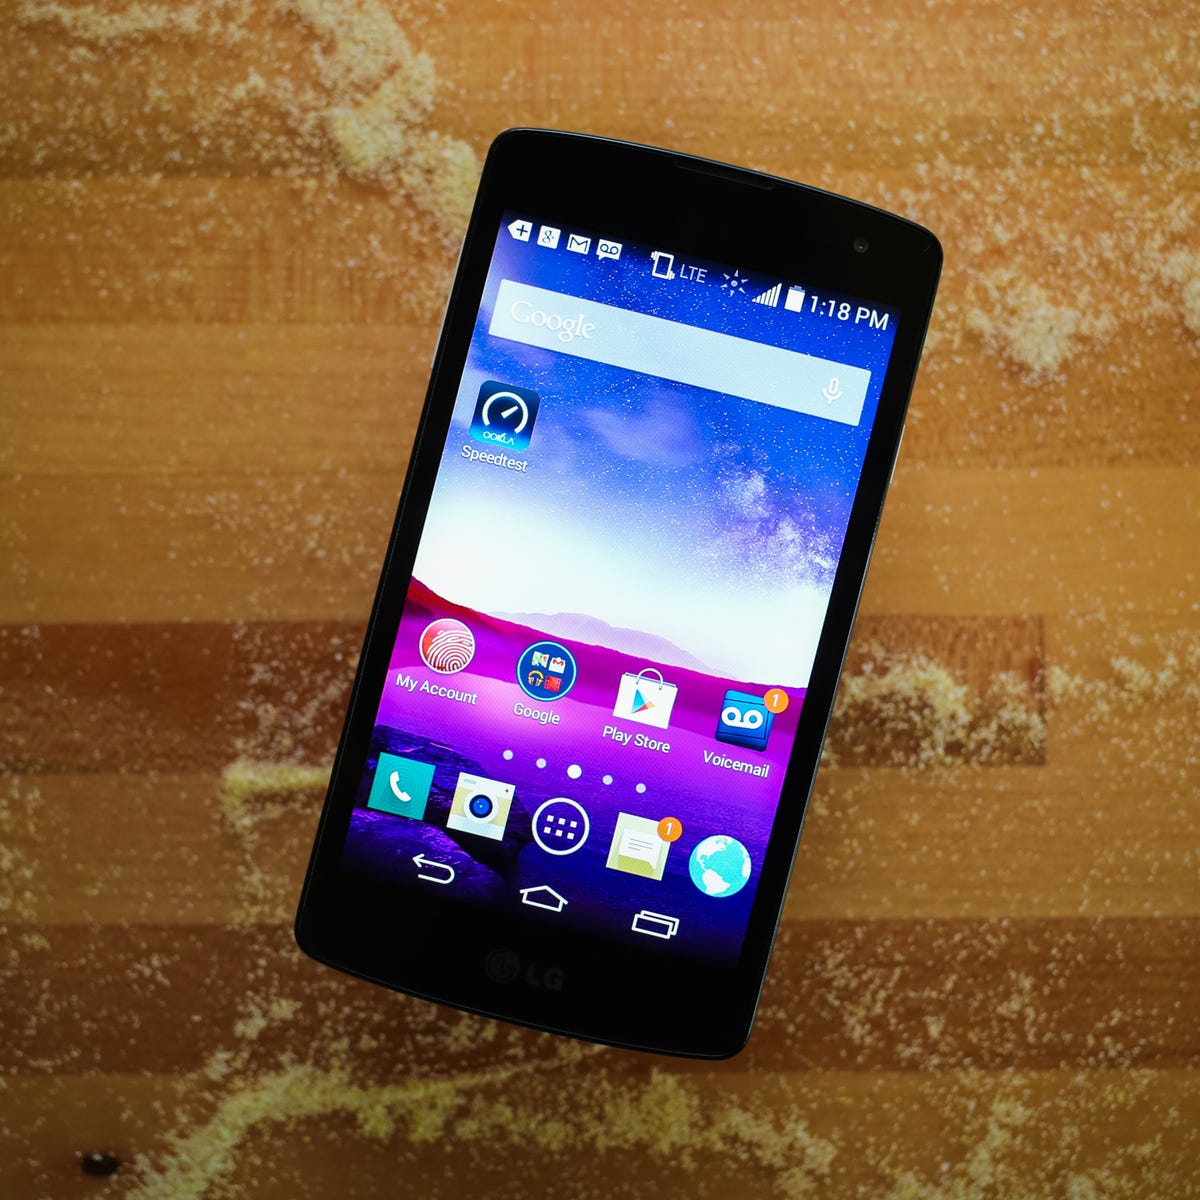 LG Tribute review: Premium style on a budget - CNET